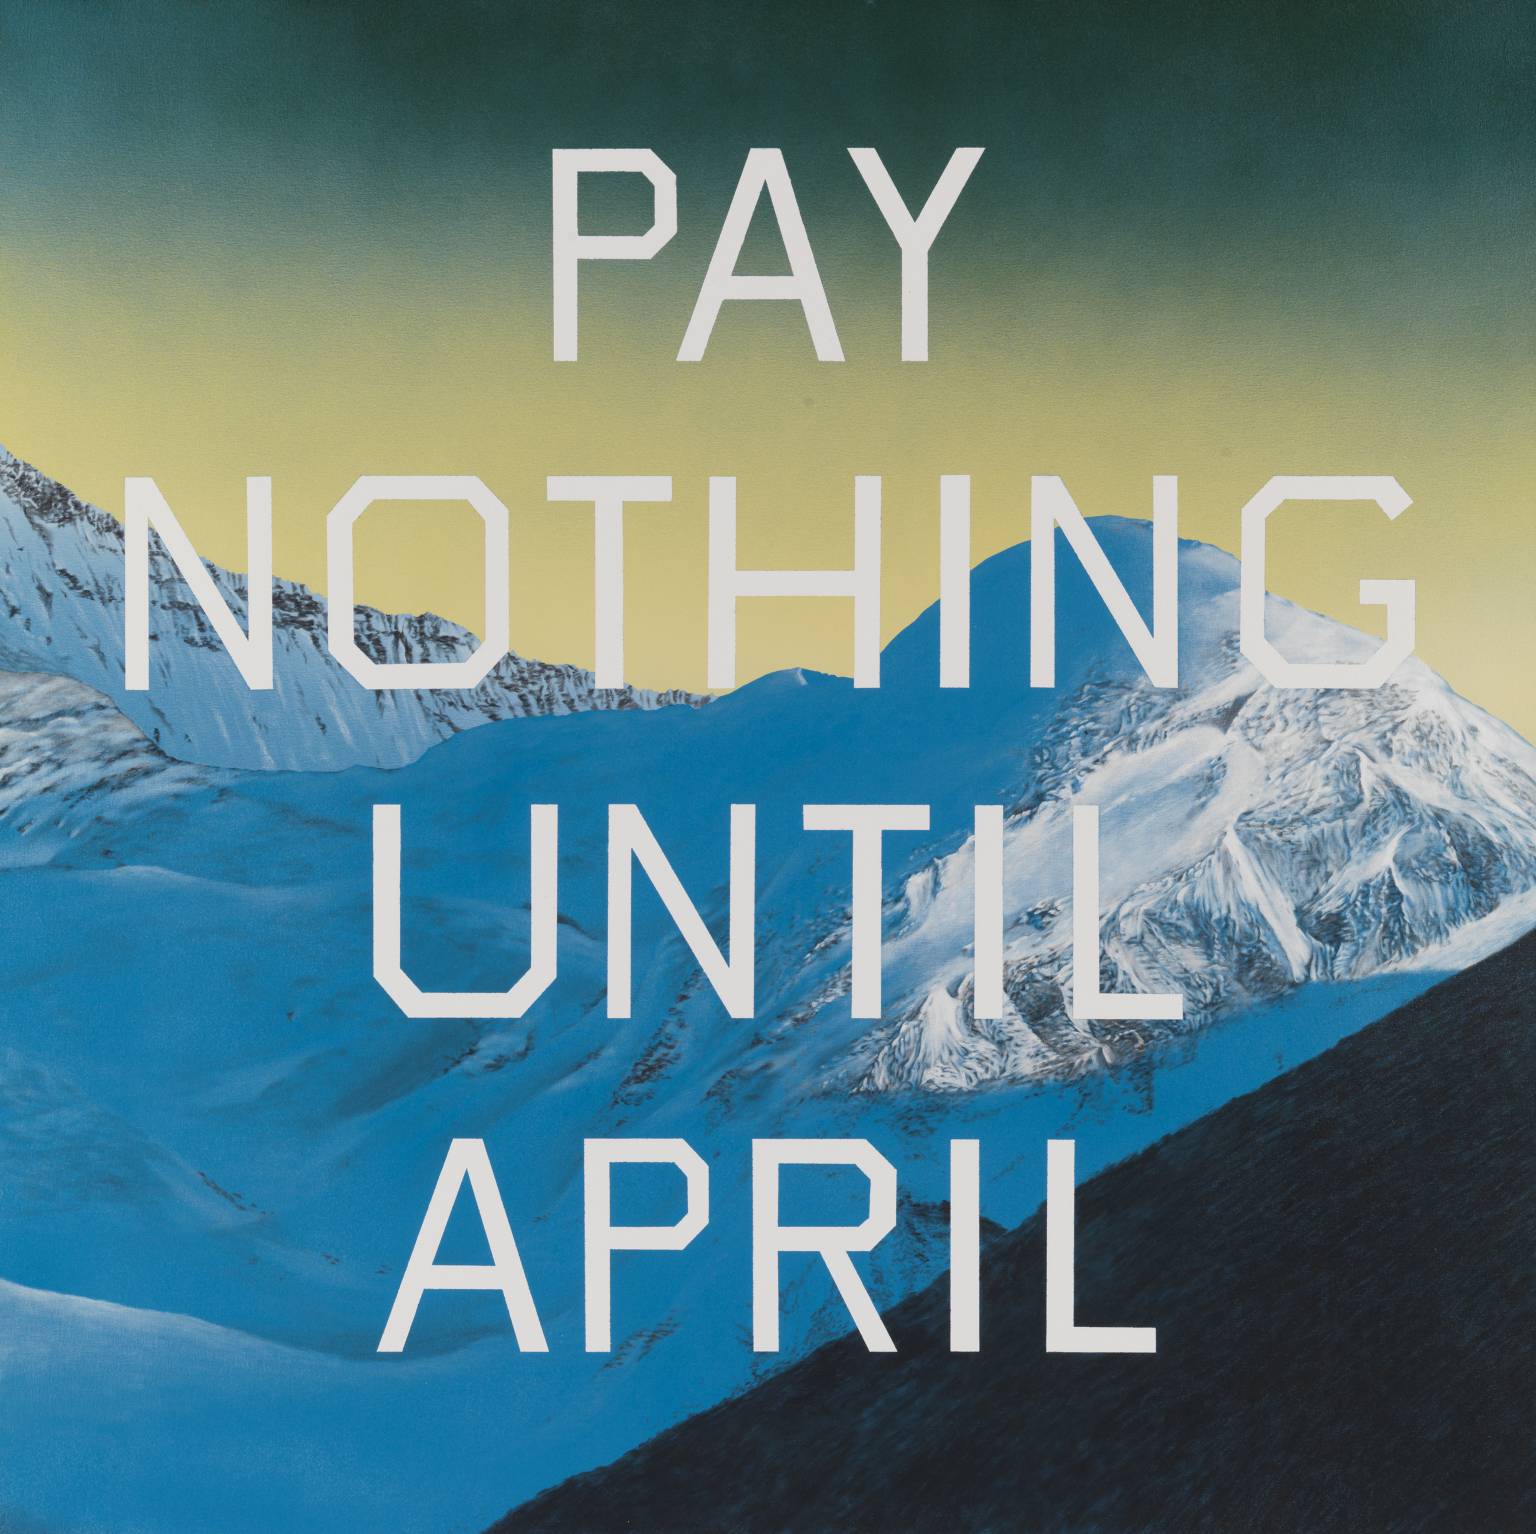 Saatchi Art's collection of Ed Ruscha Inspired works draws inspiration from his iconic style